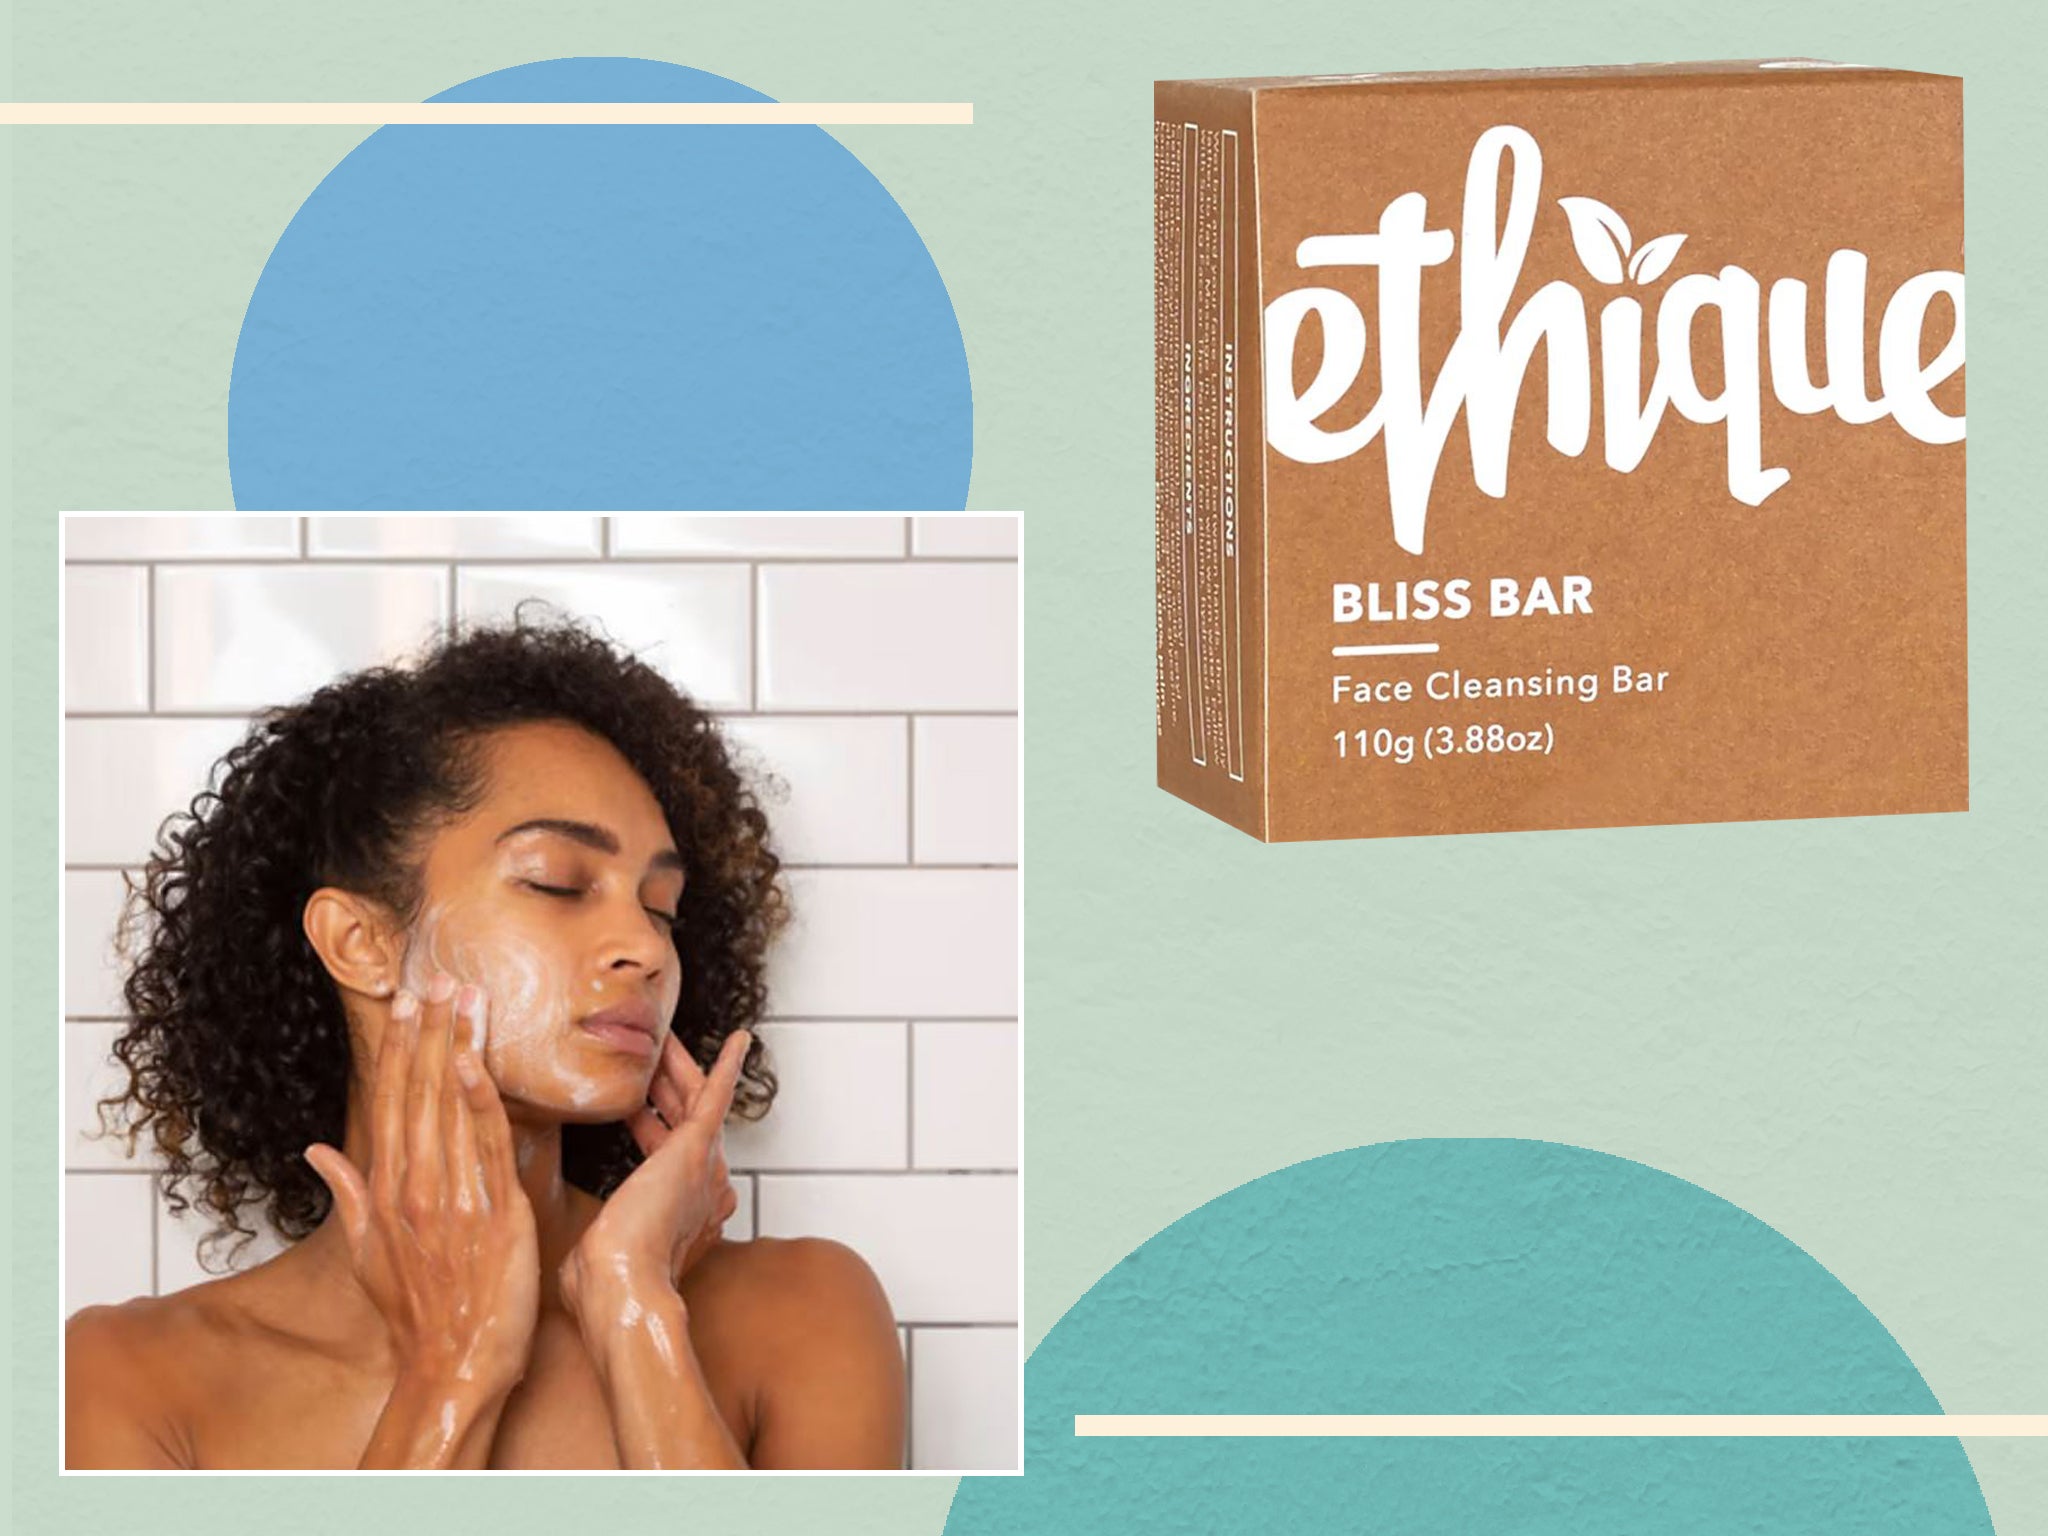 Now is the time to try a face cleanser bar